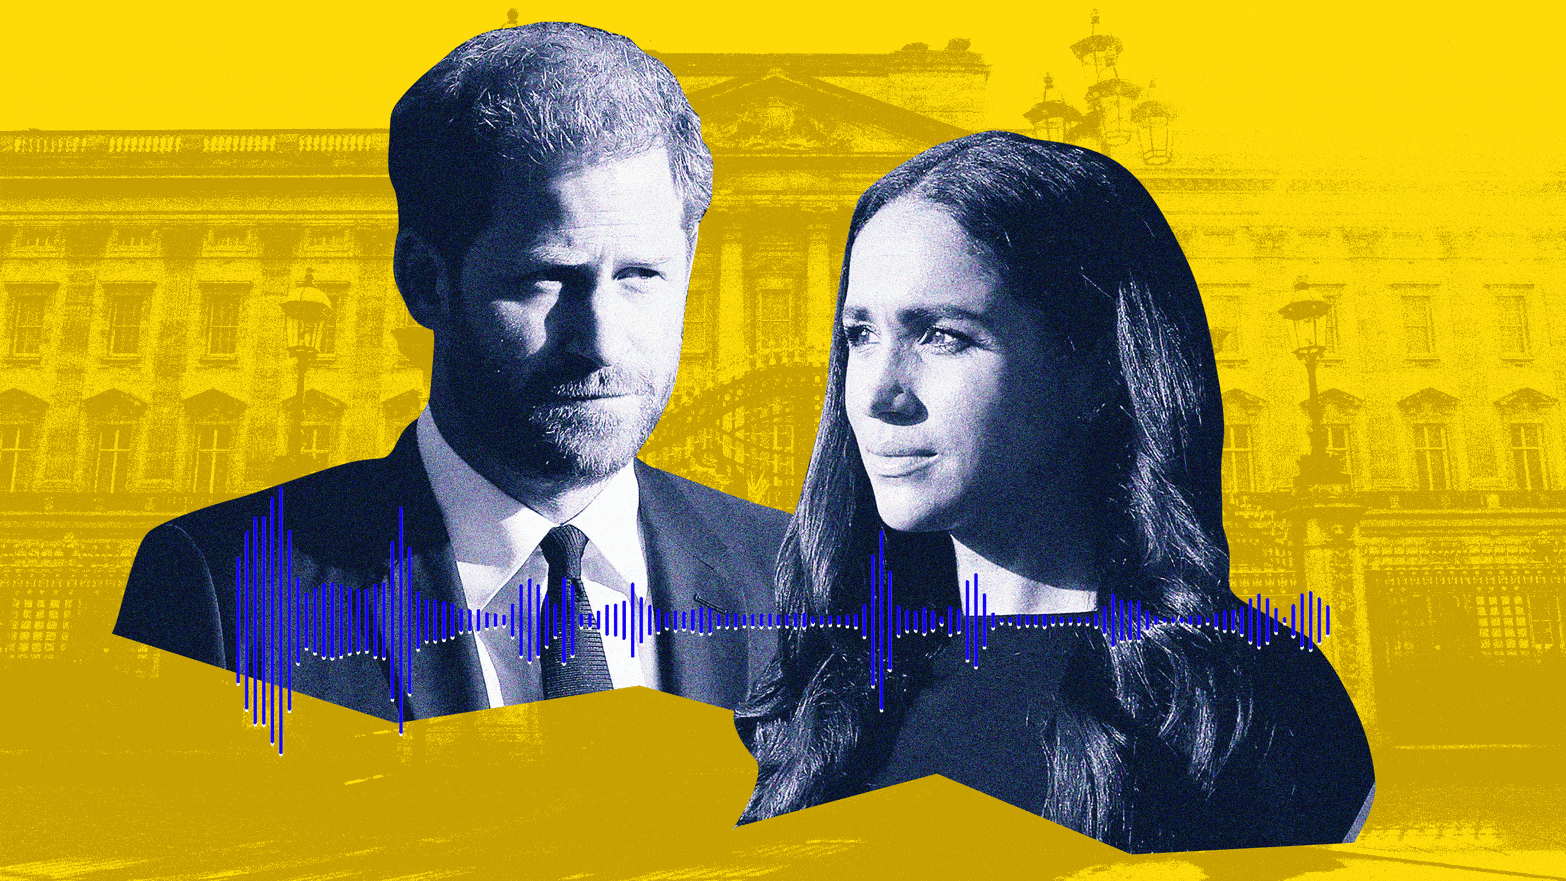 A photo illustration of the Duke of Sussex Prince Harry and Duchess of Sussex Meghan Markle.